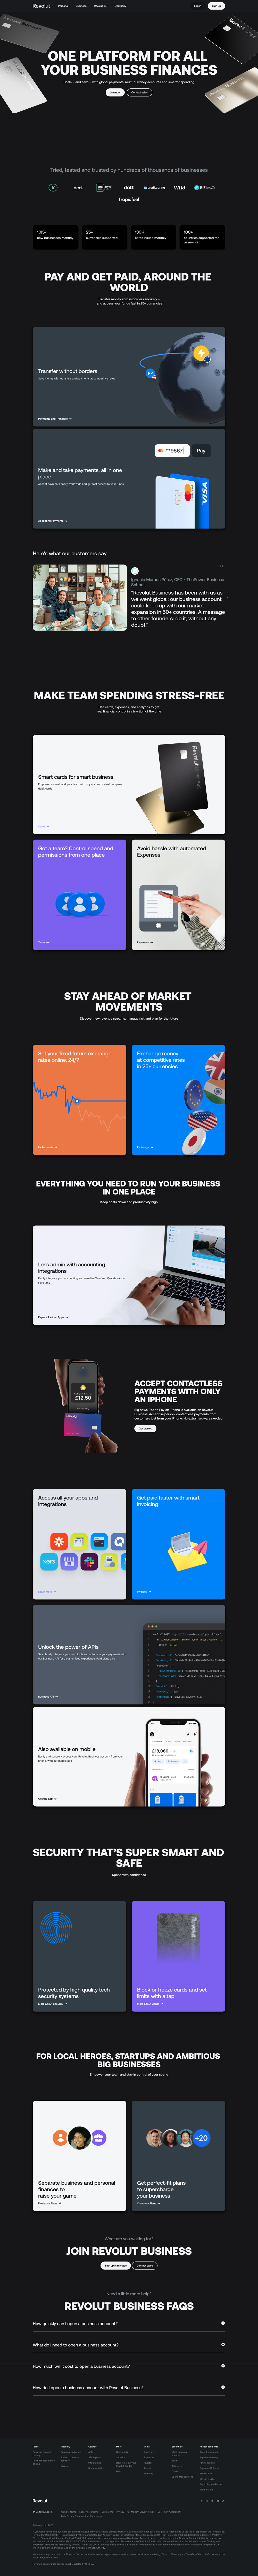 Revolut Landing Page Example: All-in-one Finance App for your Money. Join 35+ million customers globally using Revolut to send money to 160+ countries, hold up-to 36 currencies in app, spend in 150+ currencies, and manage their money.